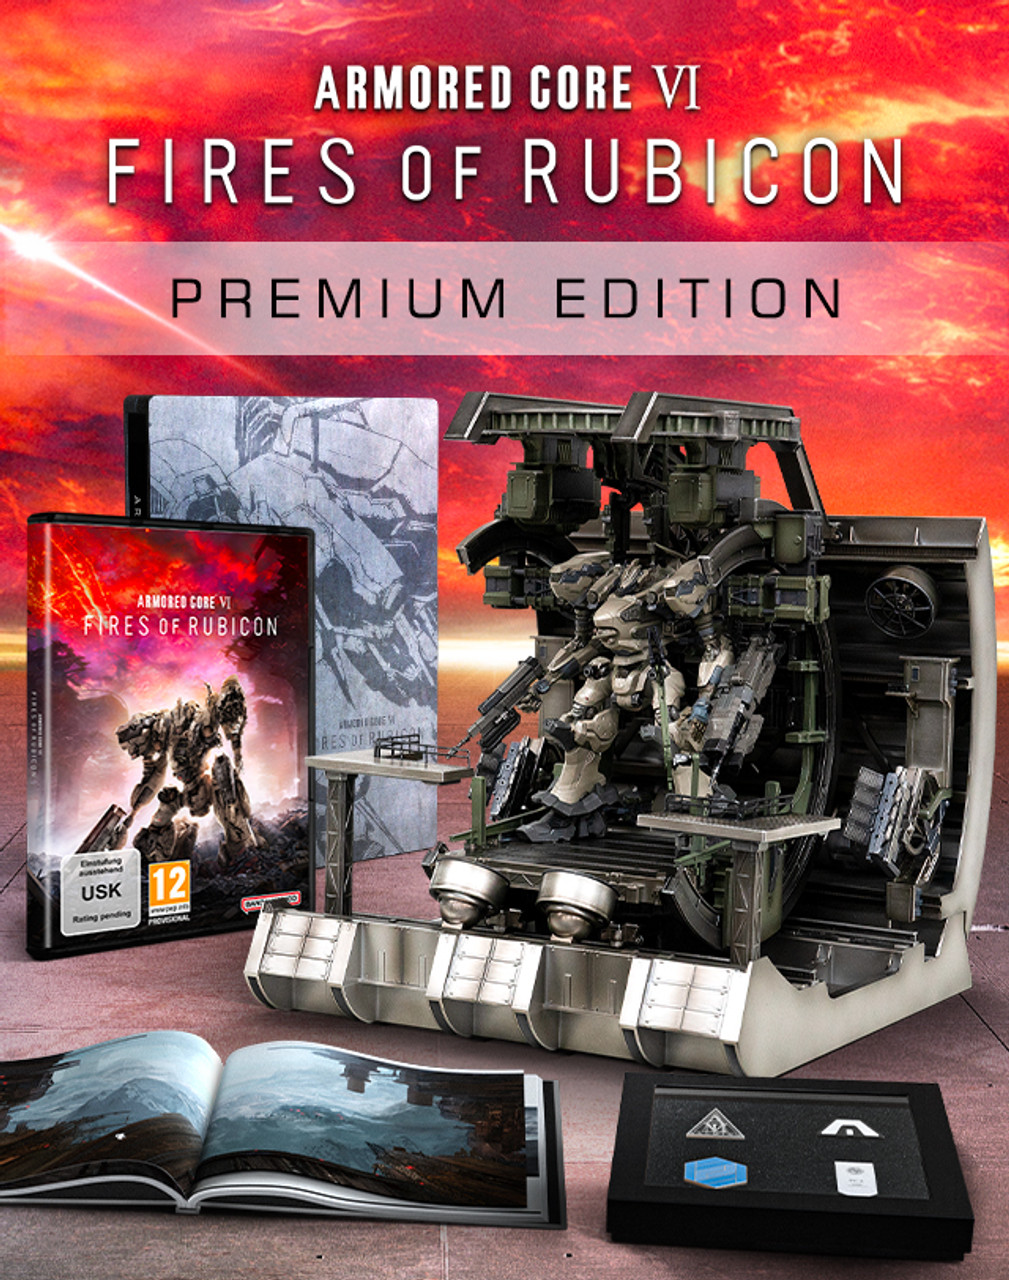 Unboxing The 'Armored Core VI: Fires of Rubicon' Premium